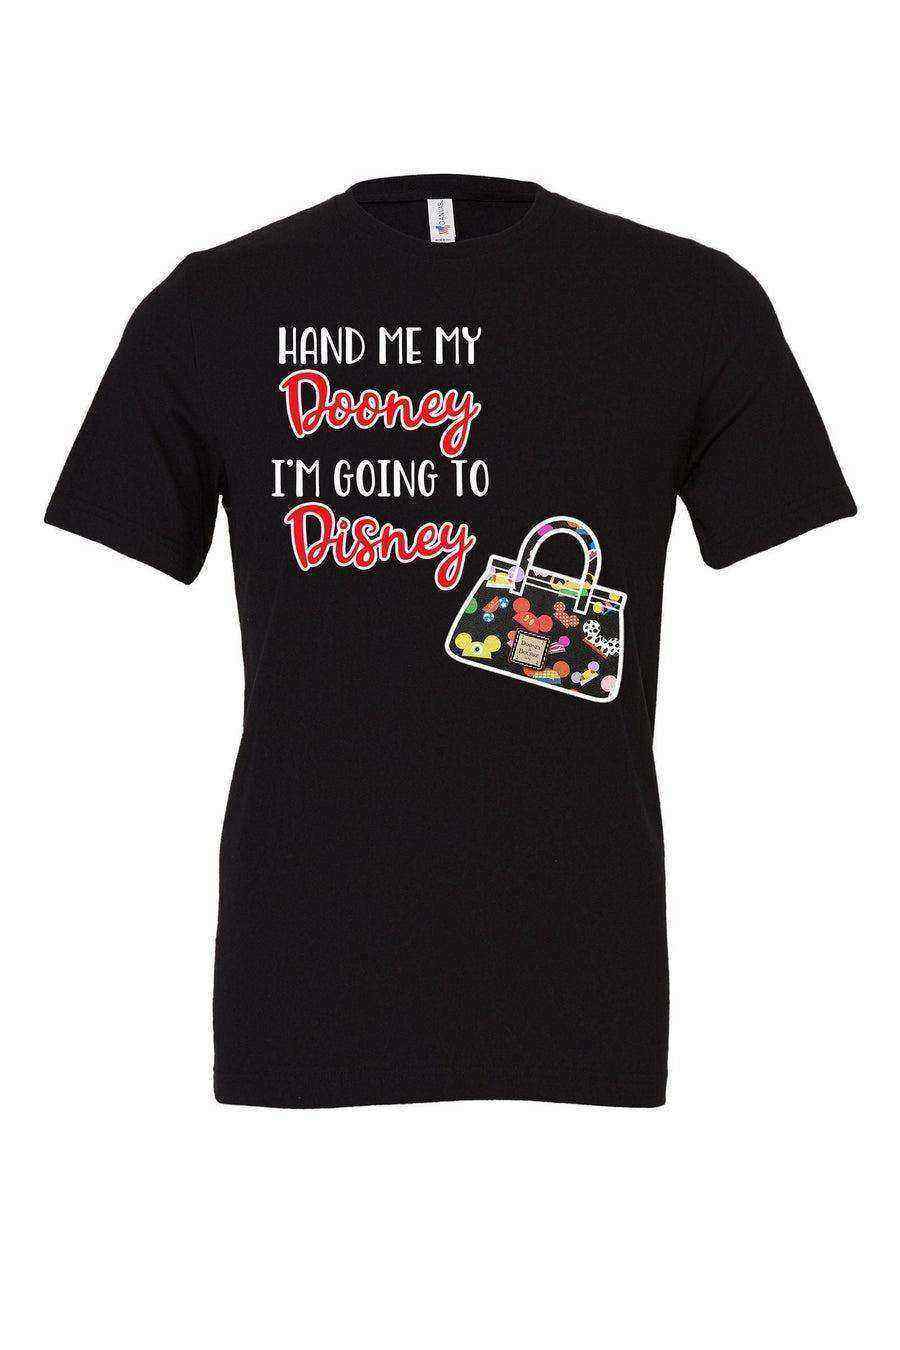 Toddler | Hand Me My Dooney Im Going To Tee - Dylan's Tees